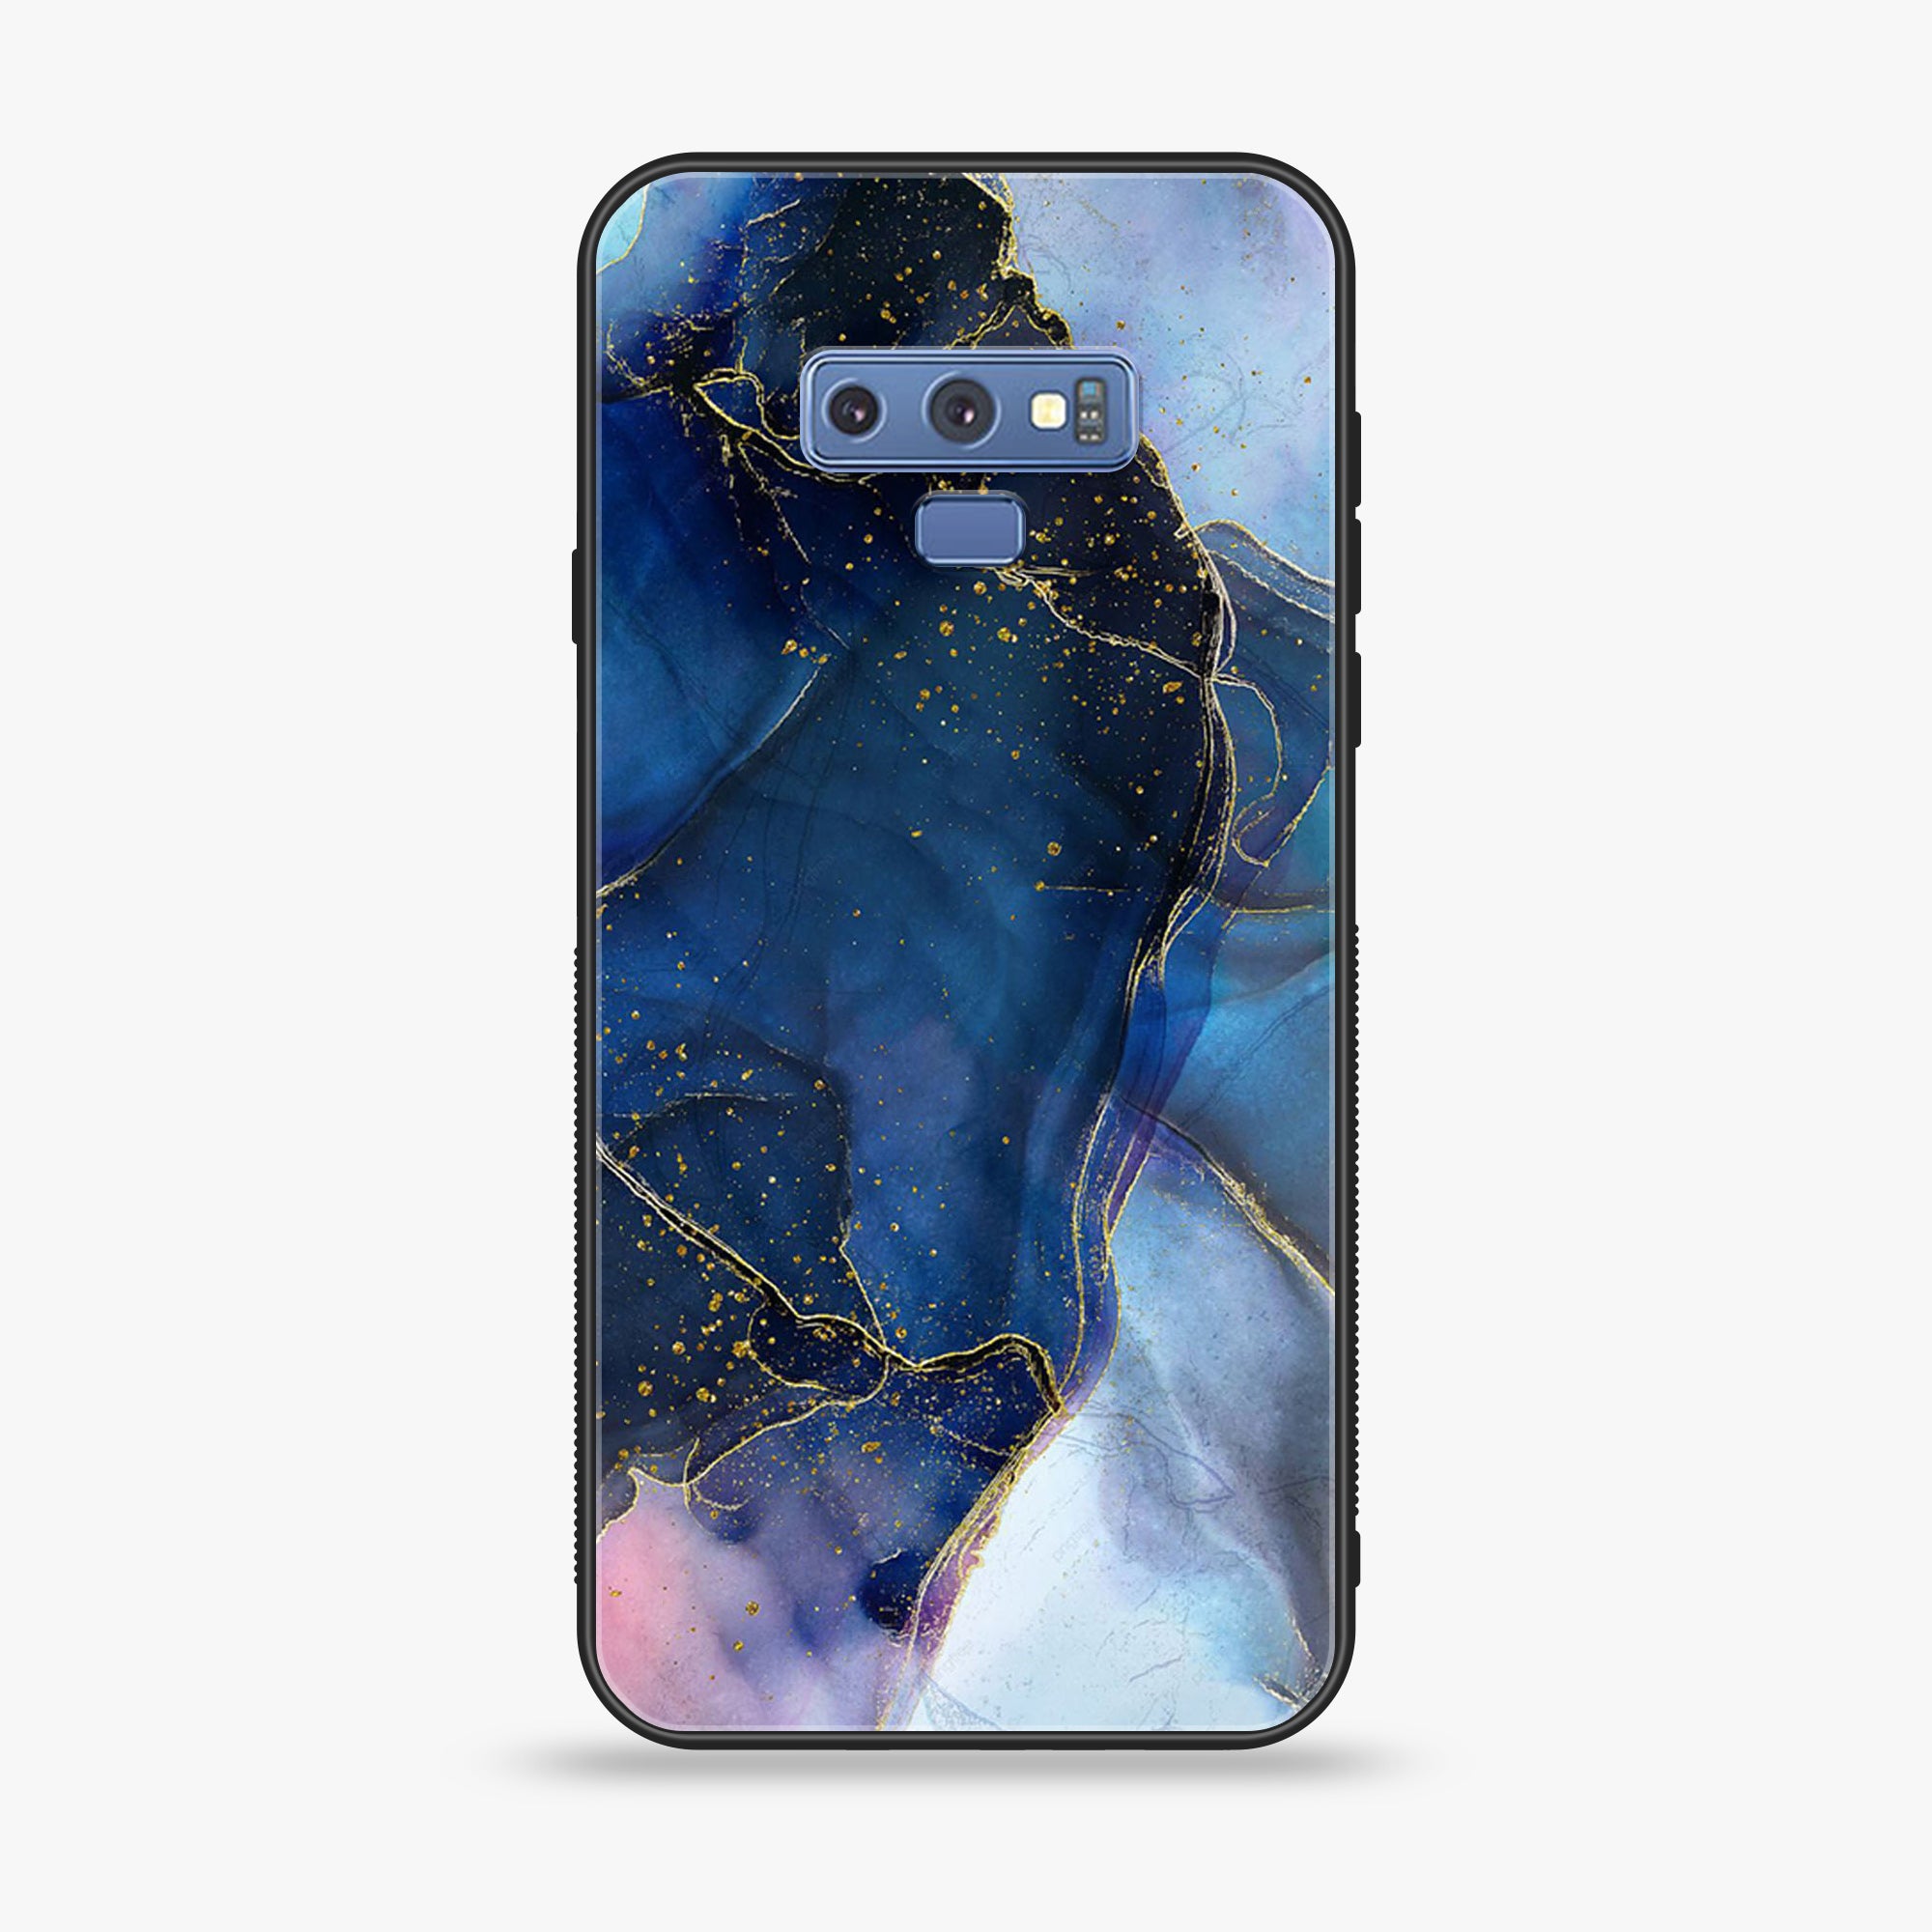 Samsung Galaxy Note 9 - Blue Marble Series - Premium Printed Glass soft Bumper shock Proof Case